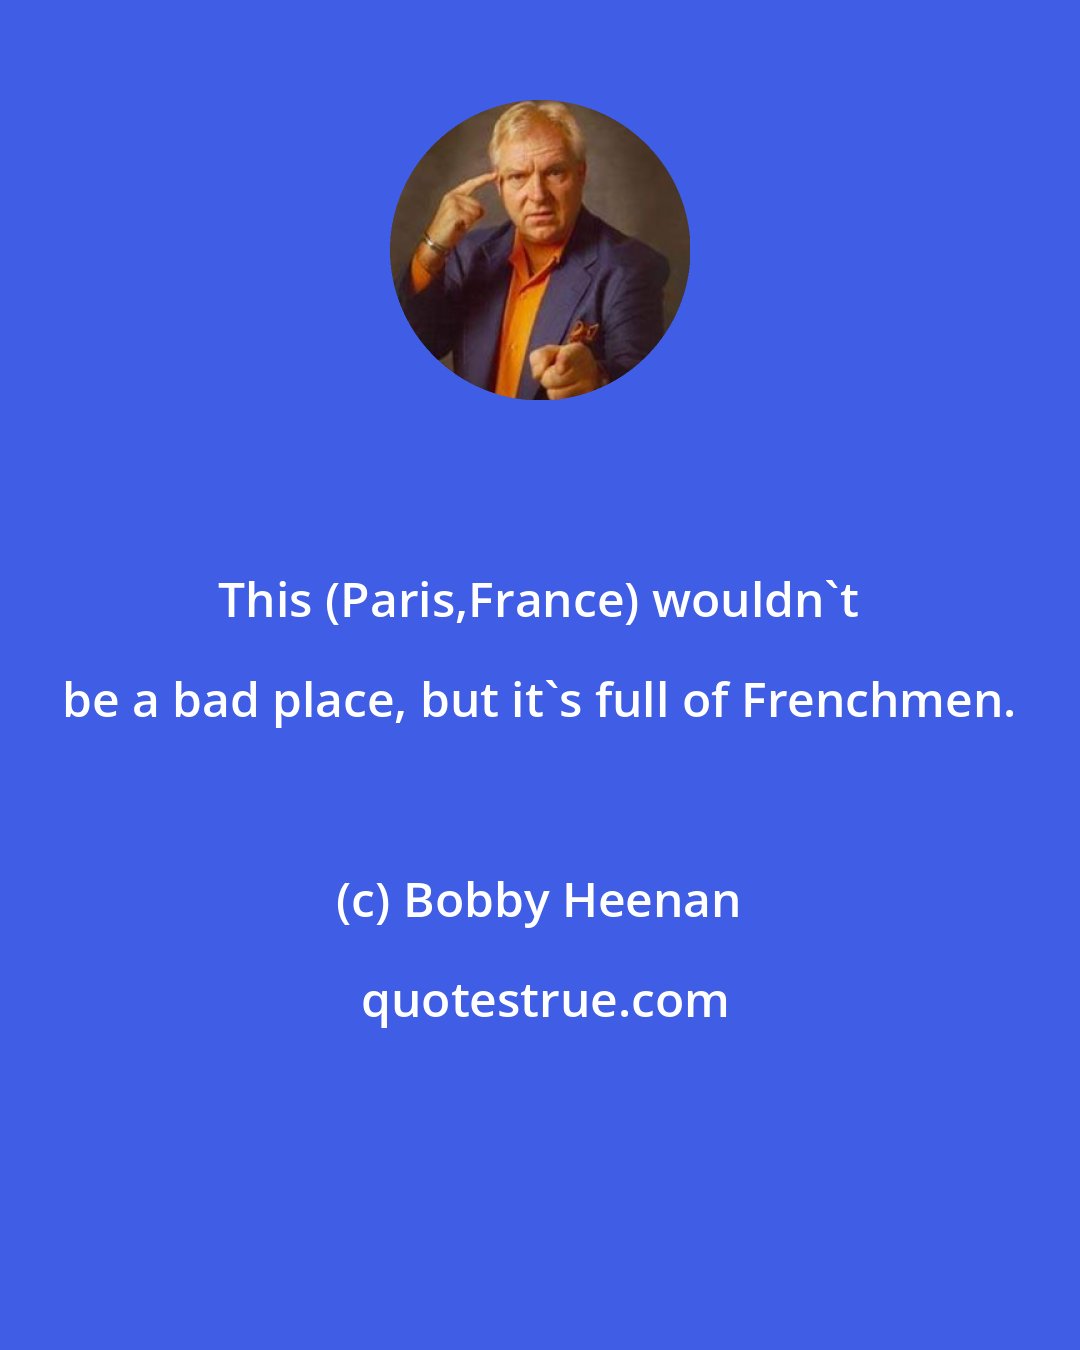 Bobby Heenan: This (Paris,France) wouldn't be a bad place, but it's full of Frenchmen.